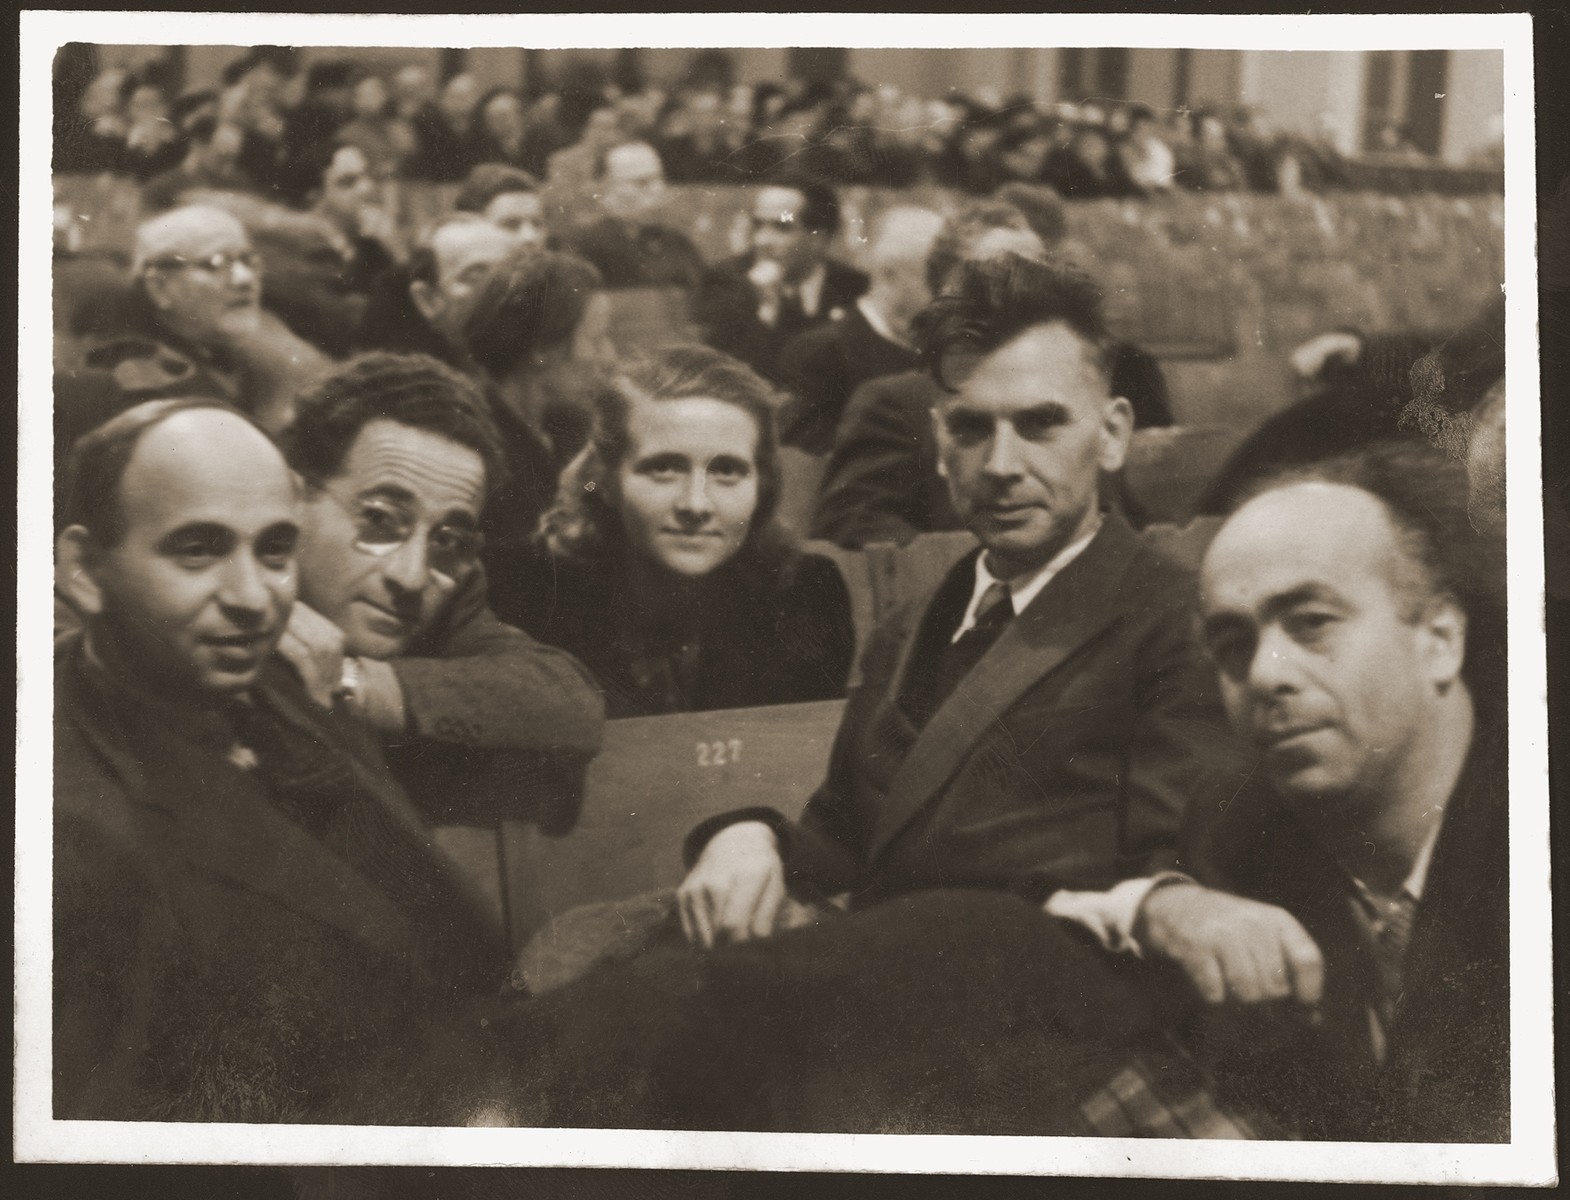 Delegates to the twenty-second World Zionist Congress in Basel.  

Pictured from right  to left are: Avraham Shlonsky (Hebrew poet), Moshe Pomerantz, Haika Grosman, Josef Jambor (editor of a Hungarian newspaper), and Chanan Rubin (head of the socialist league in Palestine).